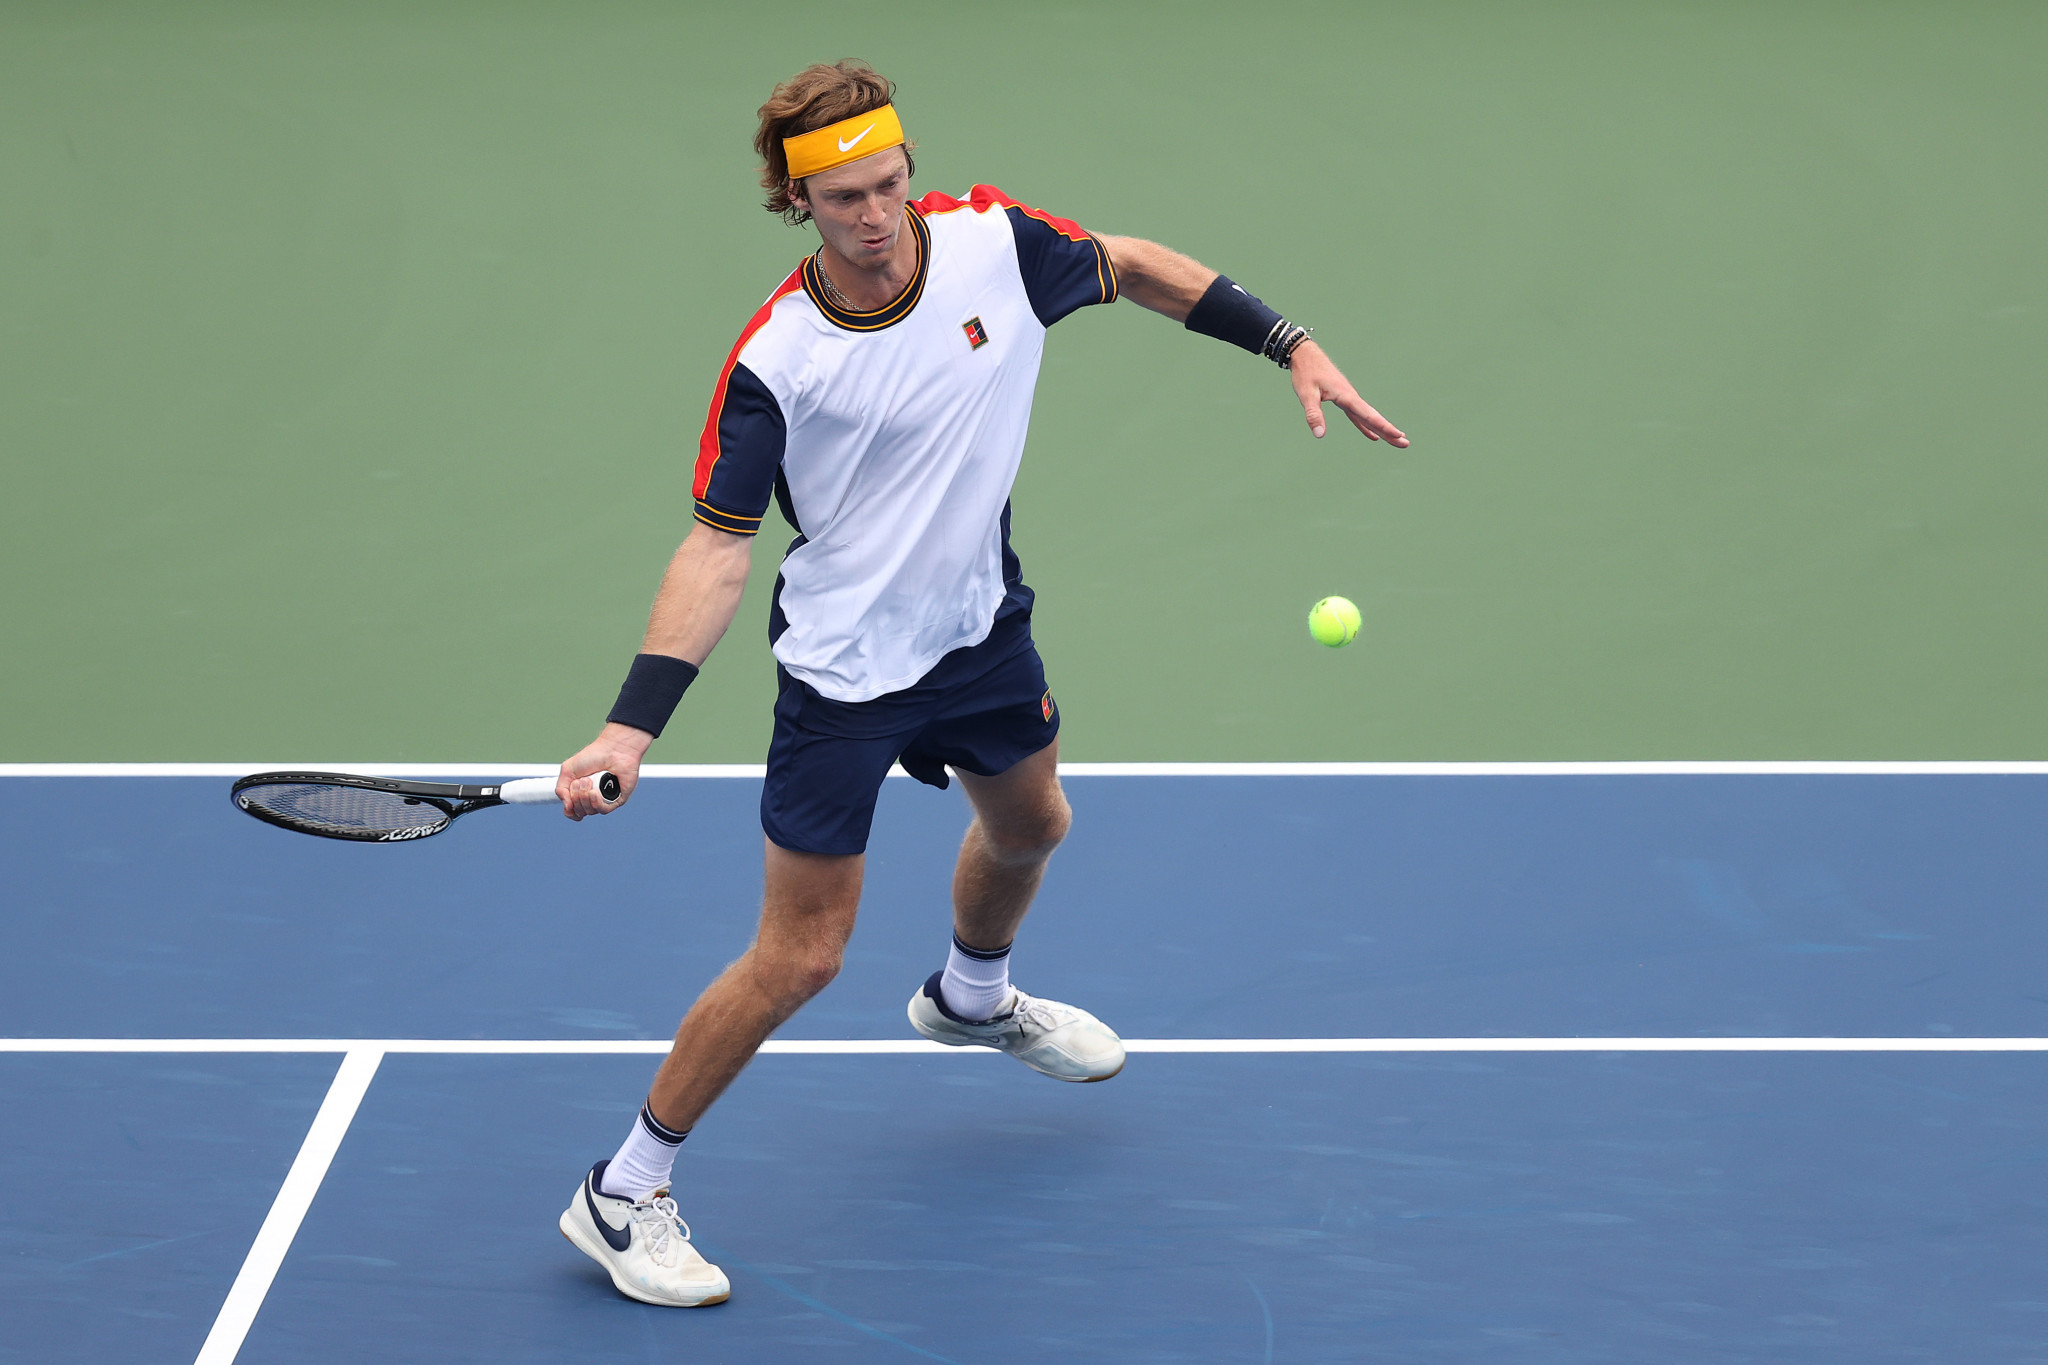 Andrey Rublev won a gold medal at the Tokyo 2020 Olympic Games and has reached the US Open quarter-finals twice ©Getty Images